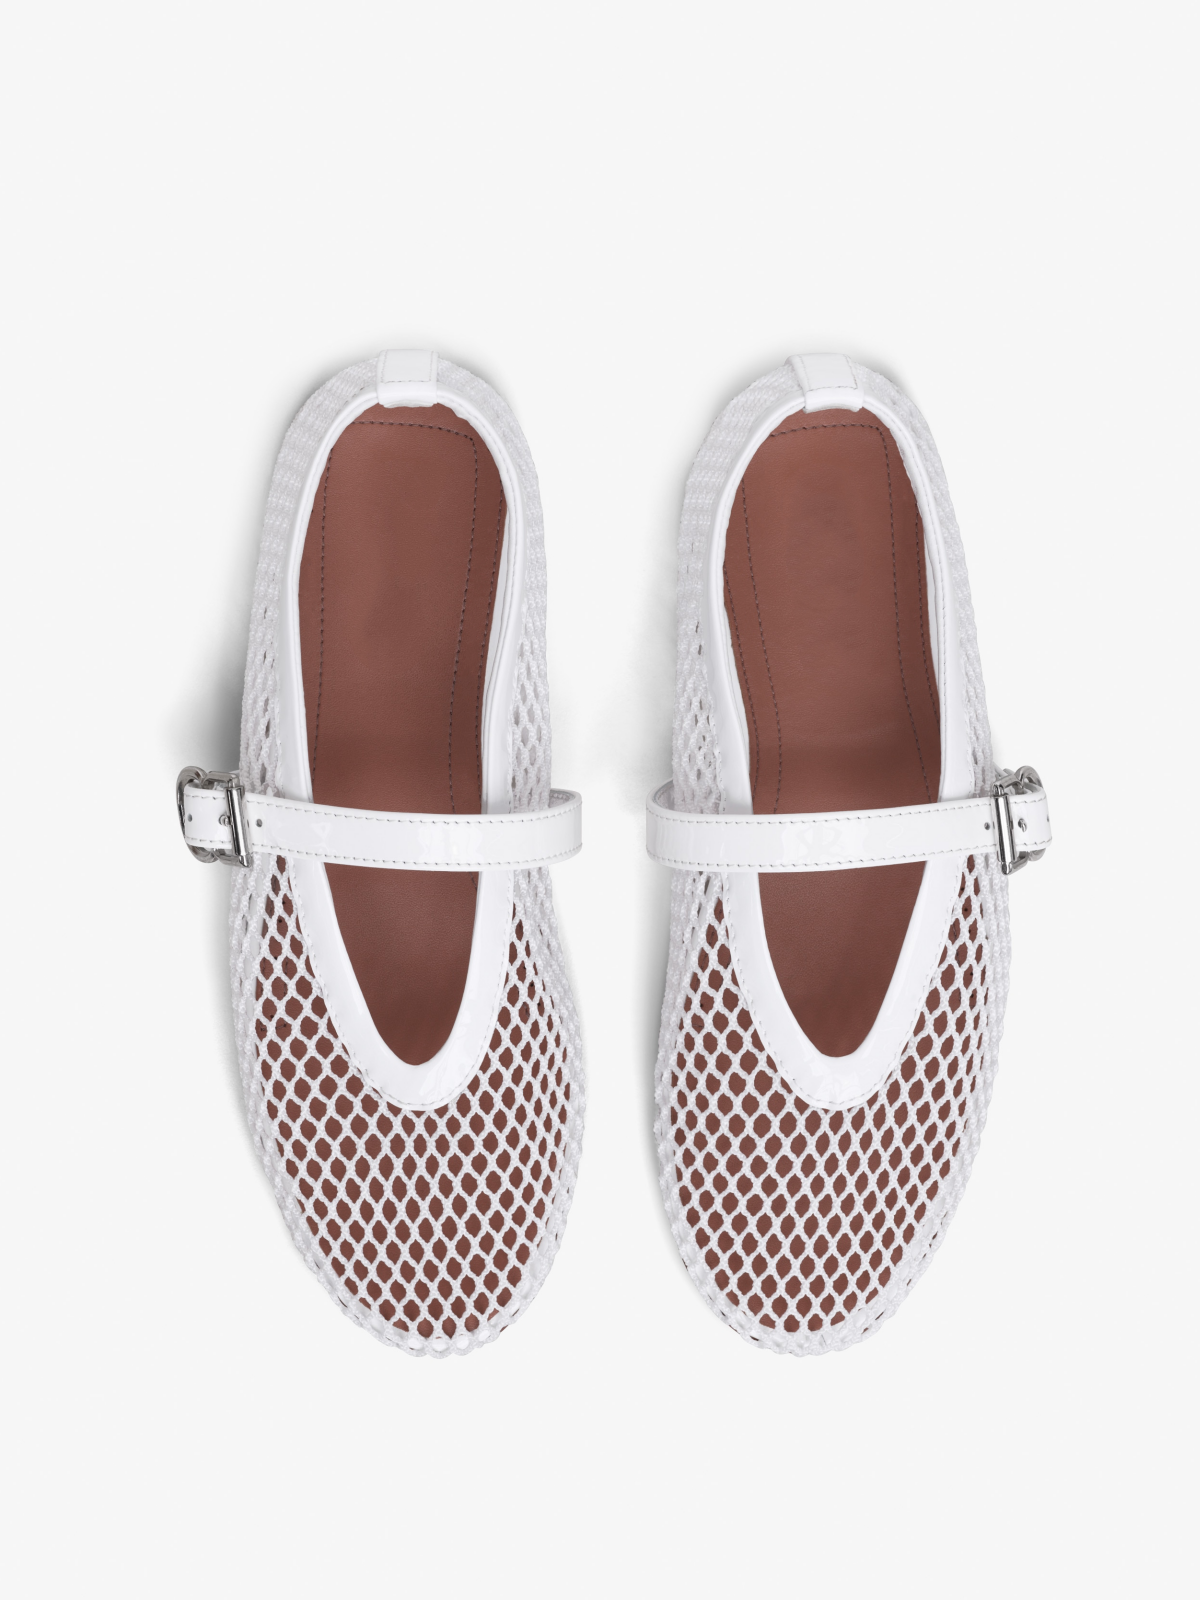 White Fishnet Ballet Flats Mary Janes With Buckle Strap